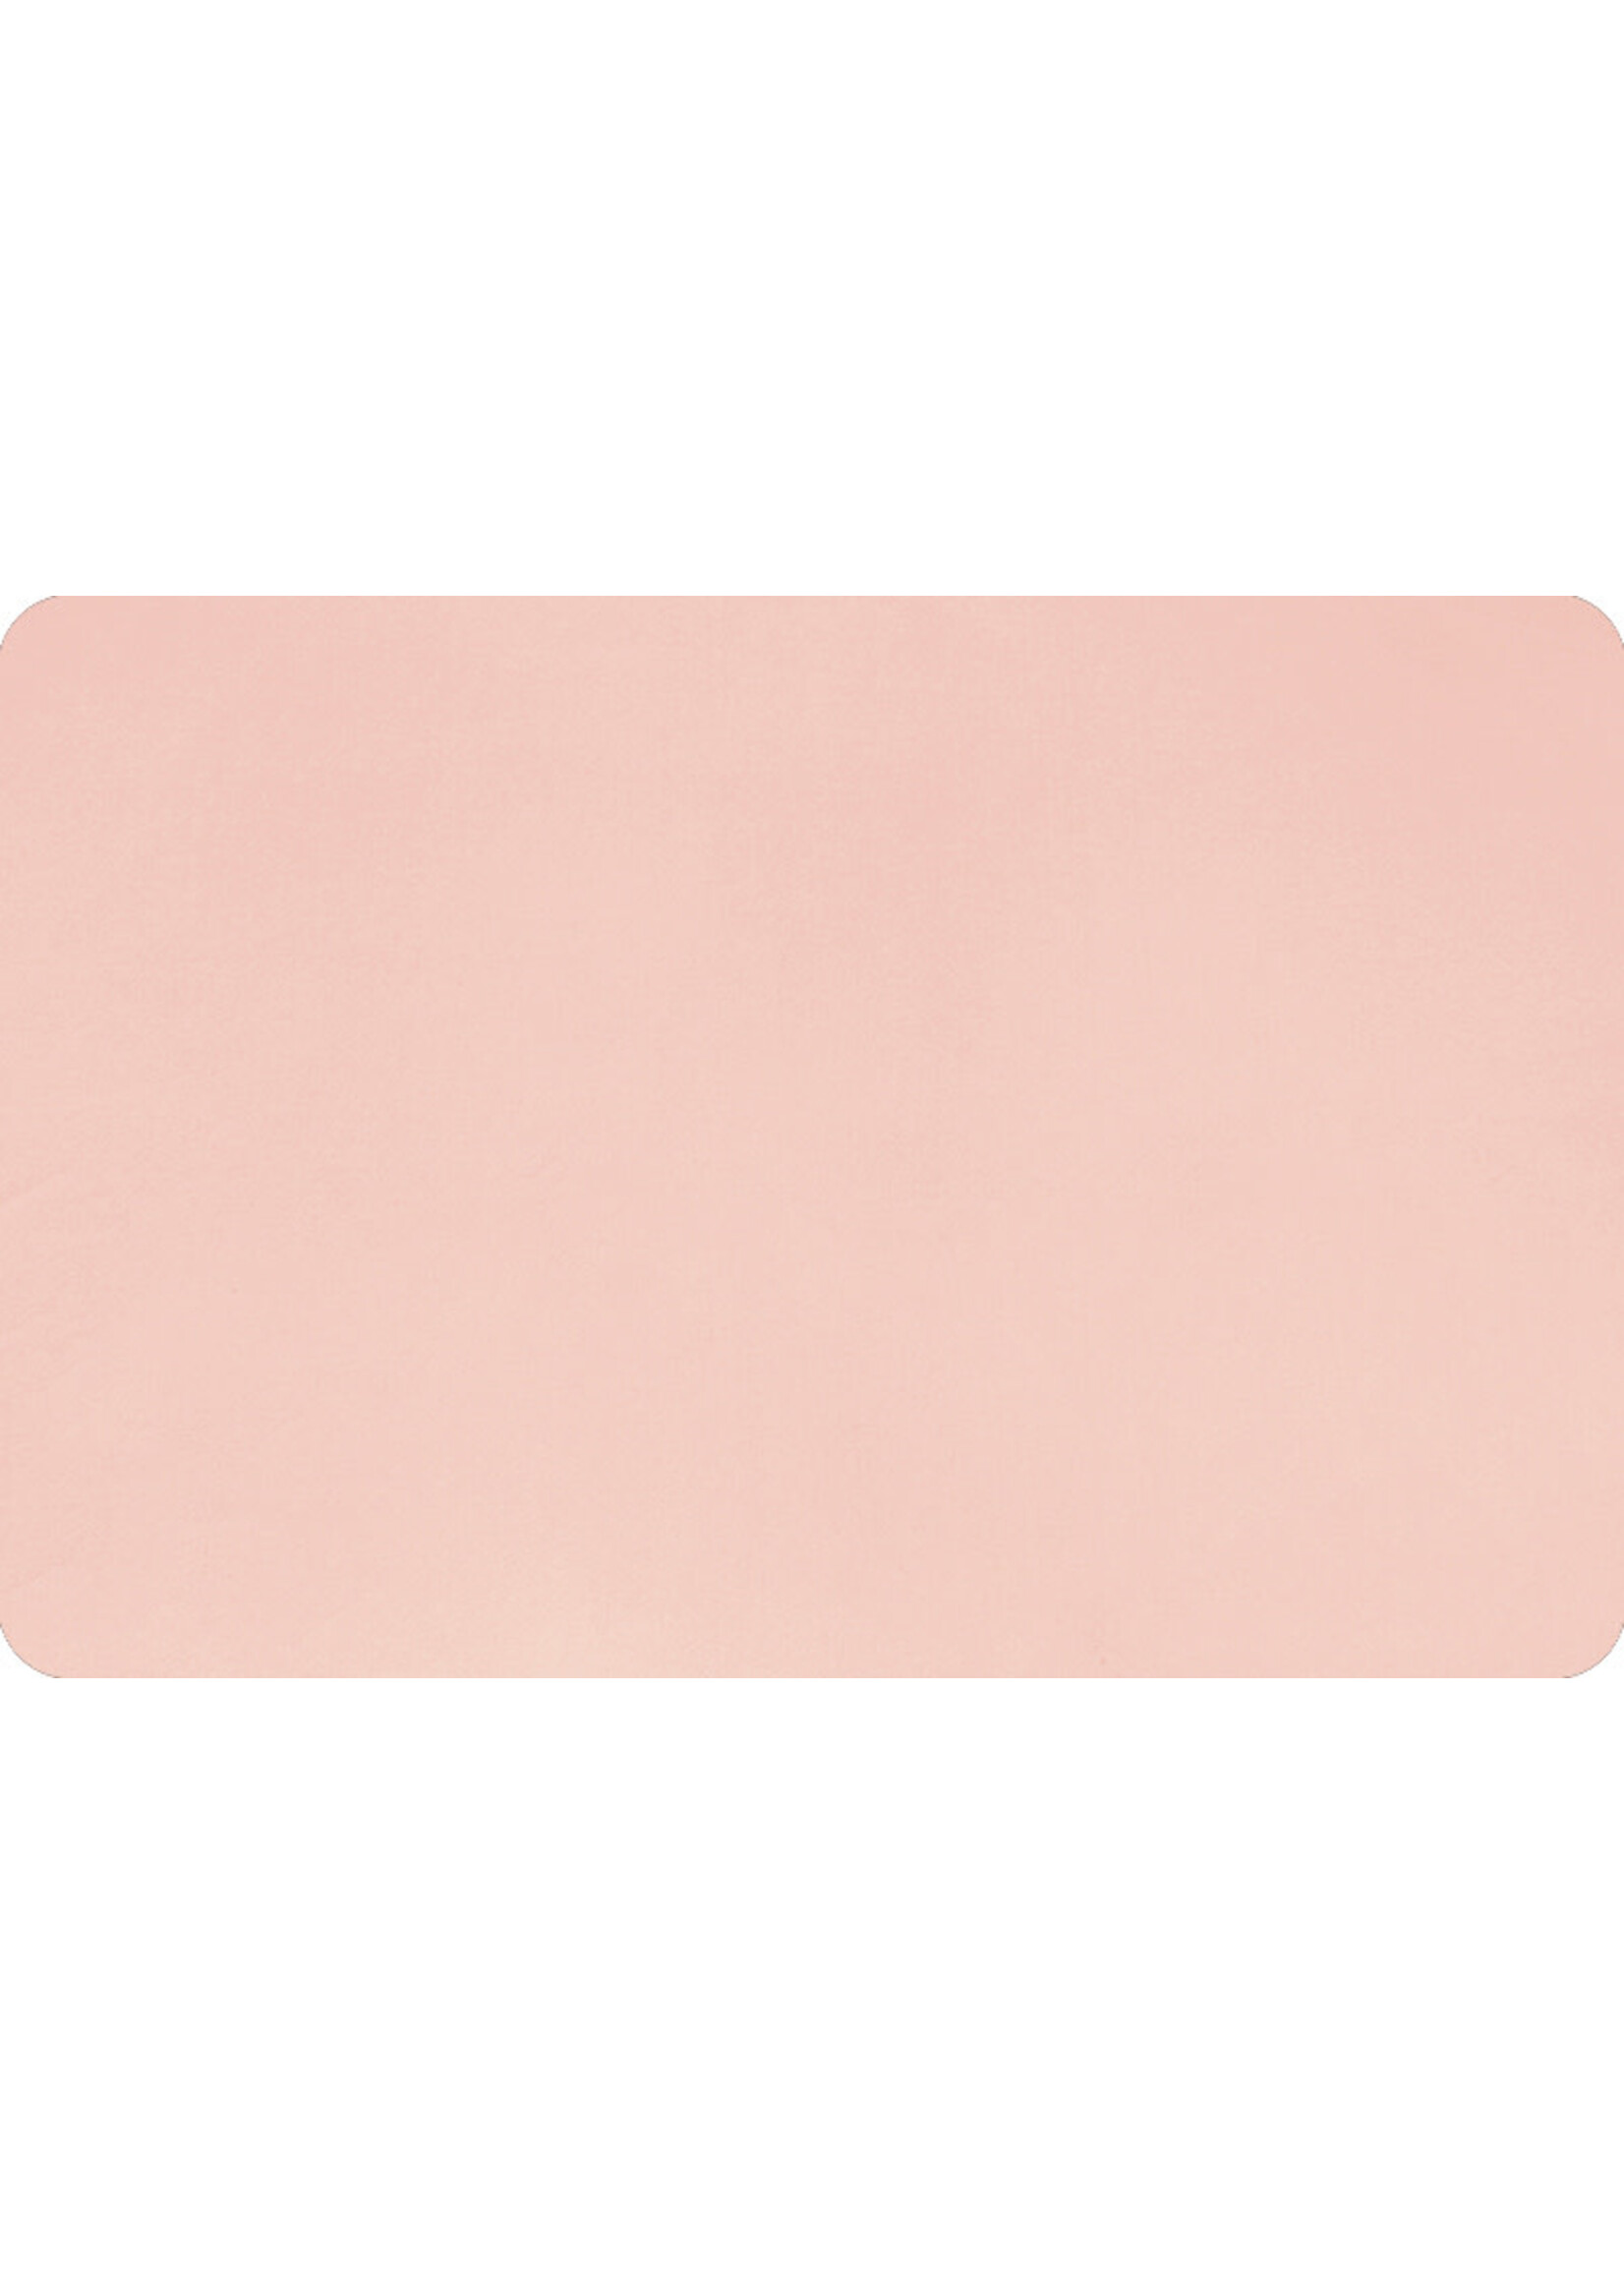 Shannon Fabrics Minky, Extra Wide Solid Cuddle3, 90" Baby Pink, (by the inch)